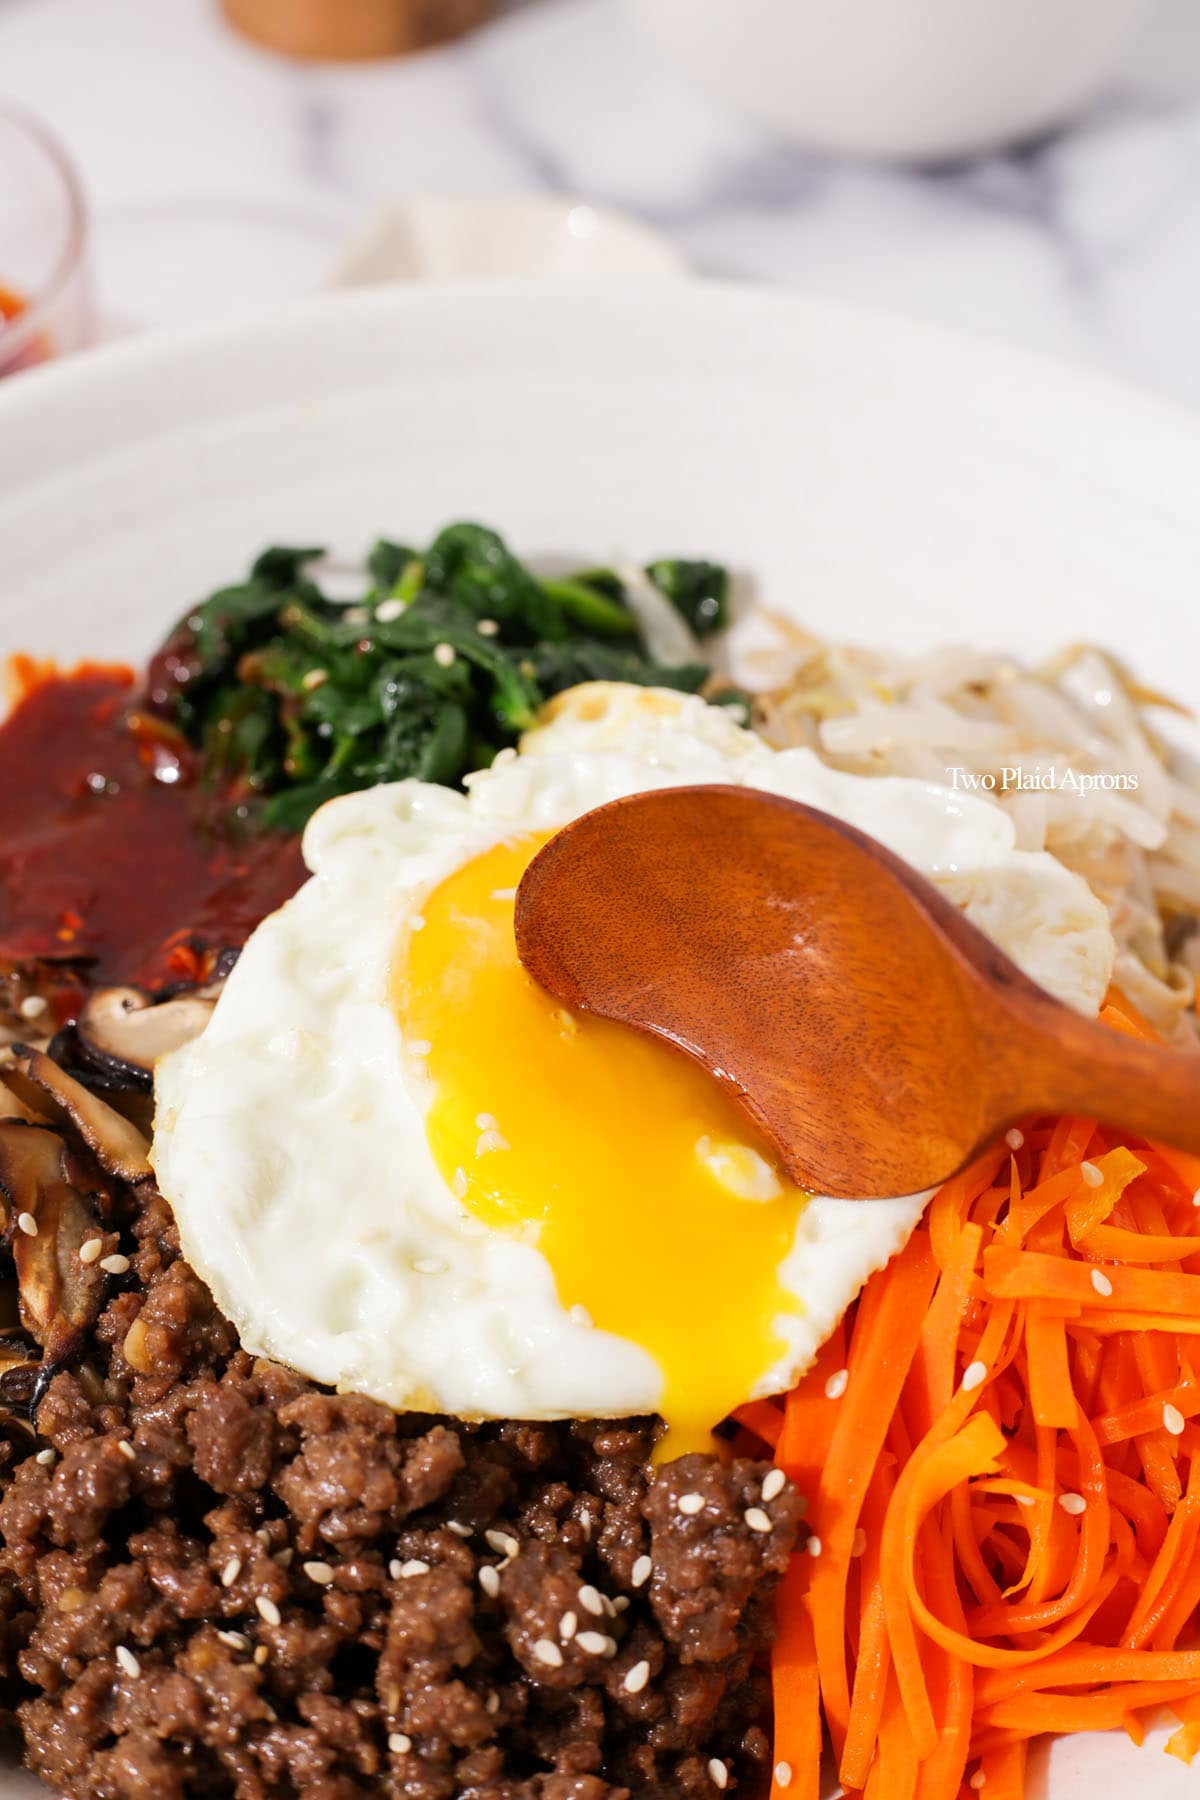 Egg yolk was popped and flowing into the bowl of bibimbap.